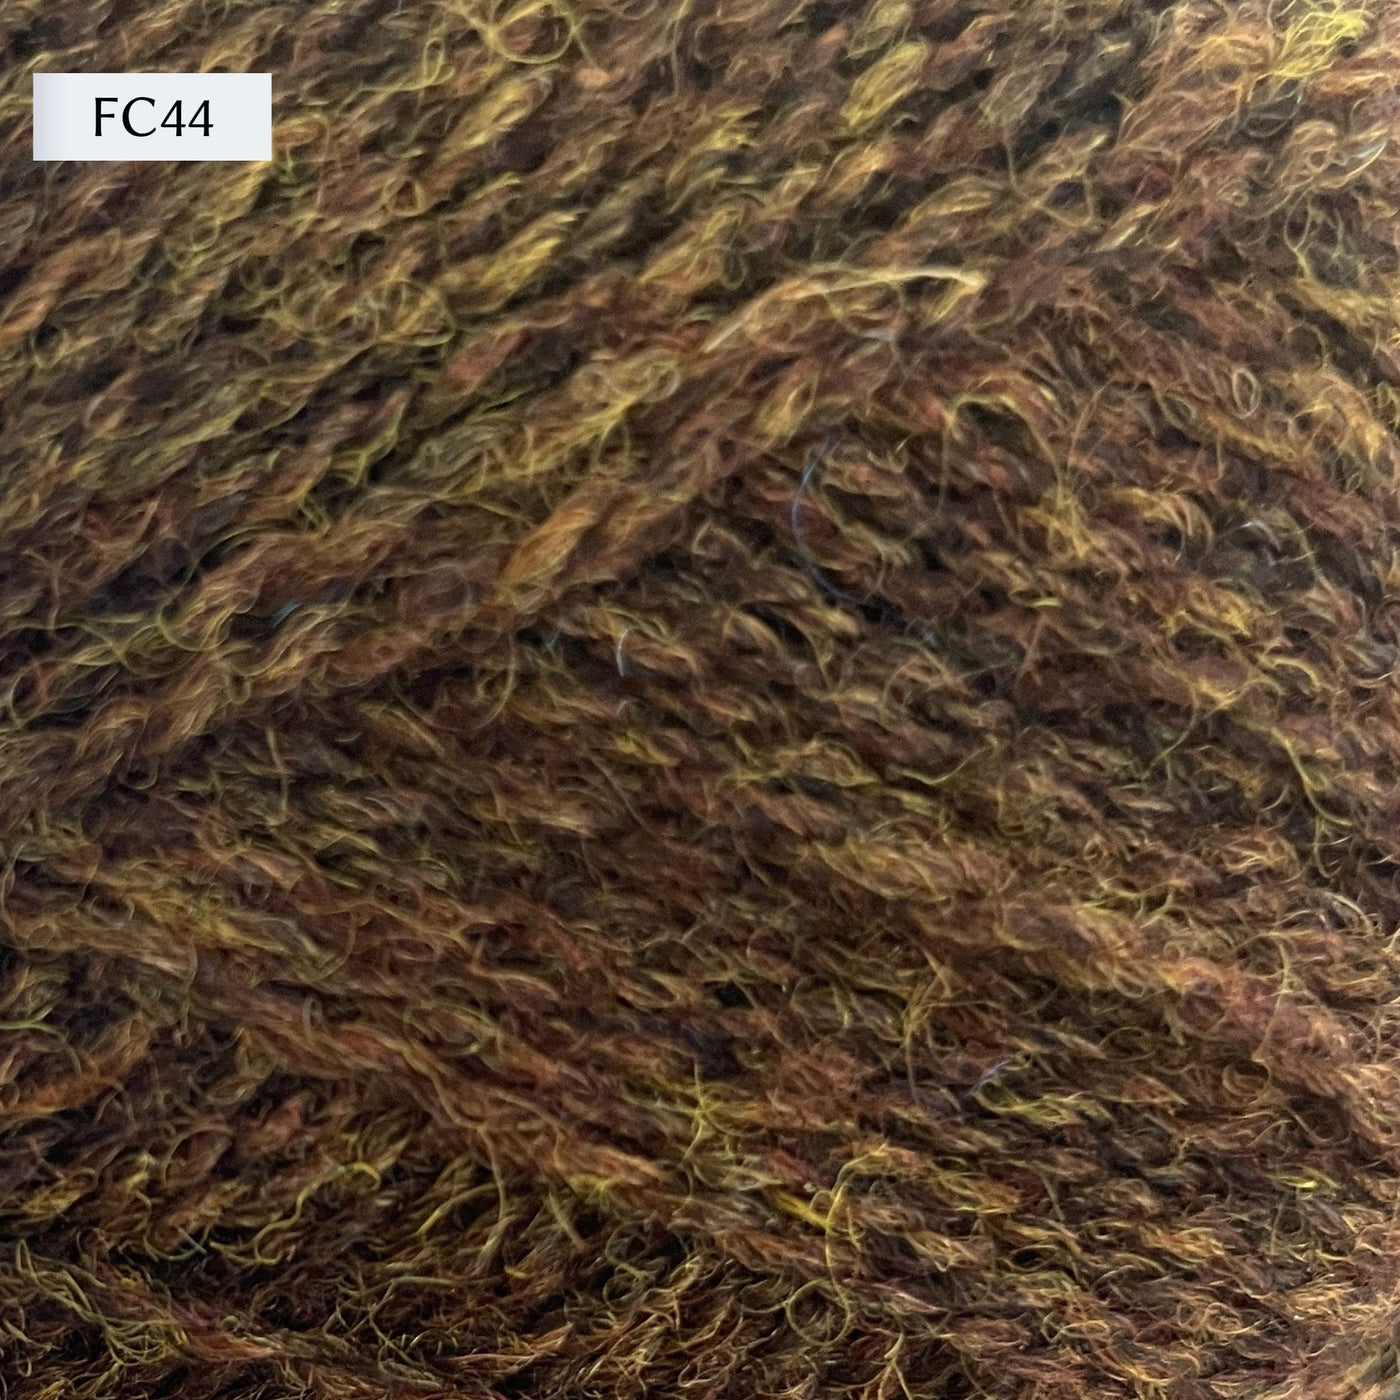 Jamieson & Smith 2ply Jumper Weight, light fingering weight yarn, in color FC44, a heathered yellow-brown